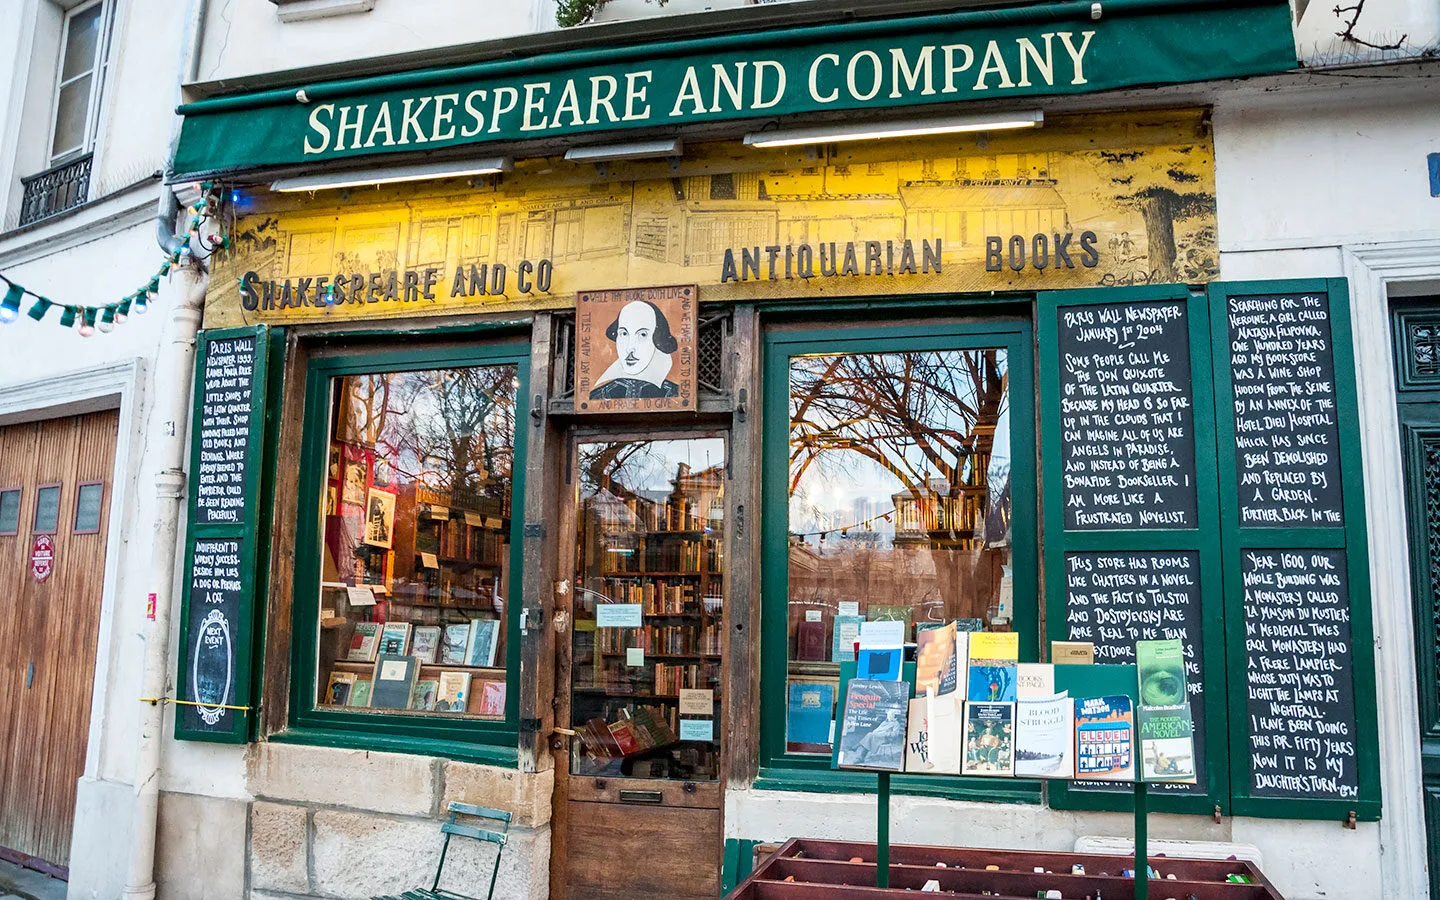 The Shakespeare and Company bookstore in Paris